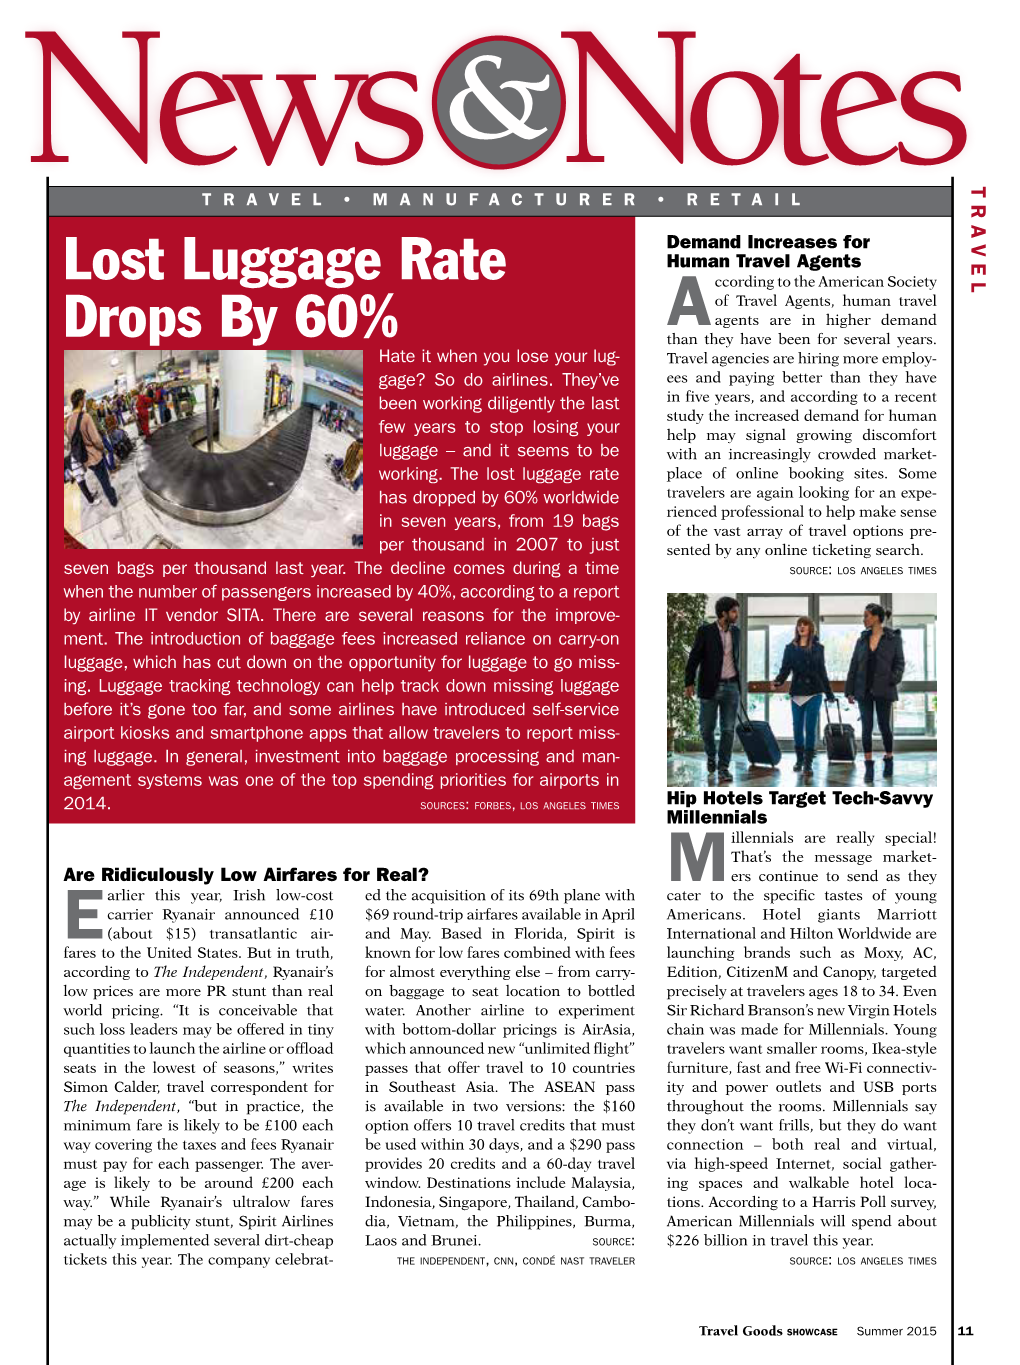 Lost Luggage Rate Drops By